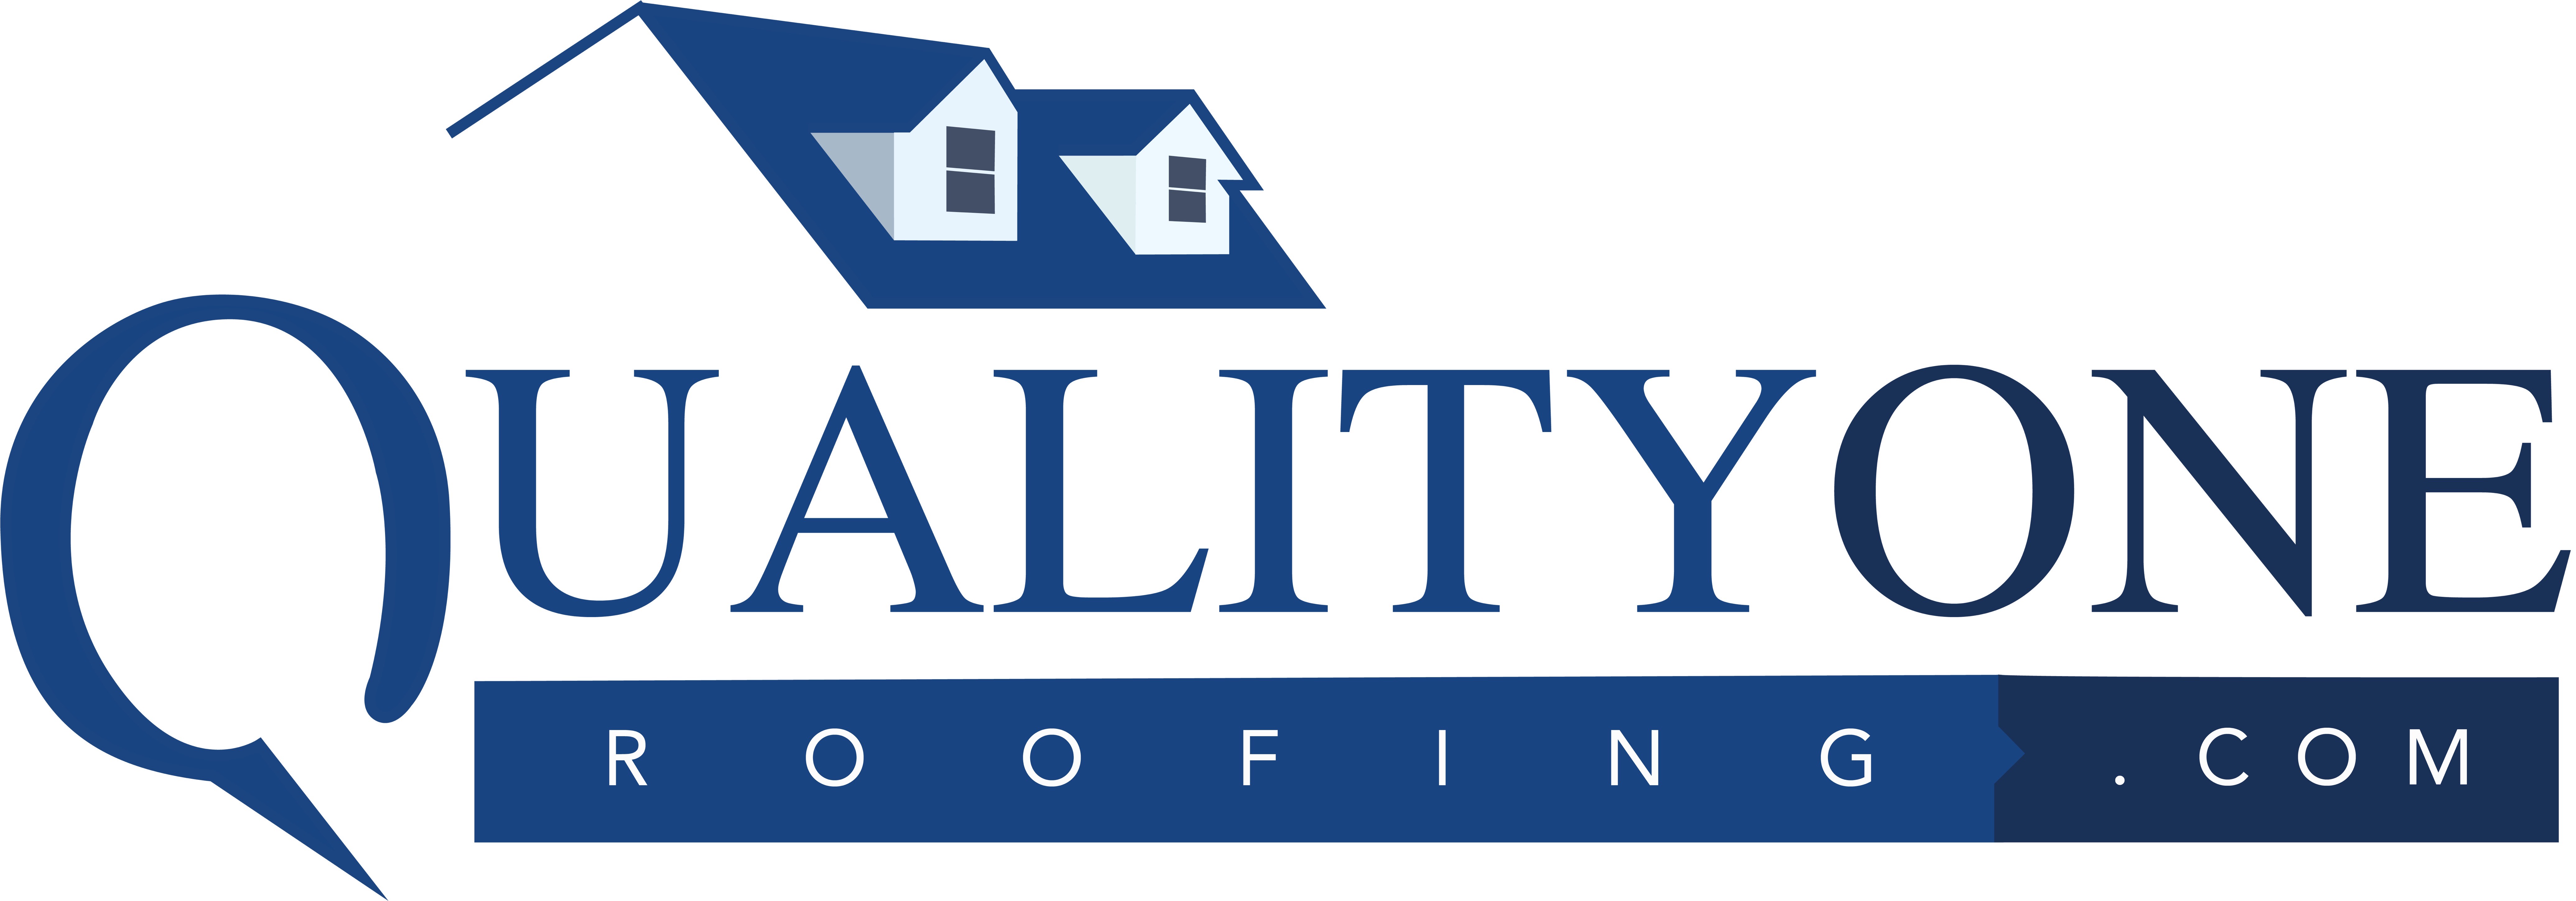 Quality One Roofing, Inc. Logo